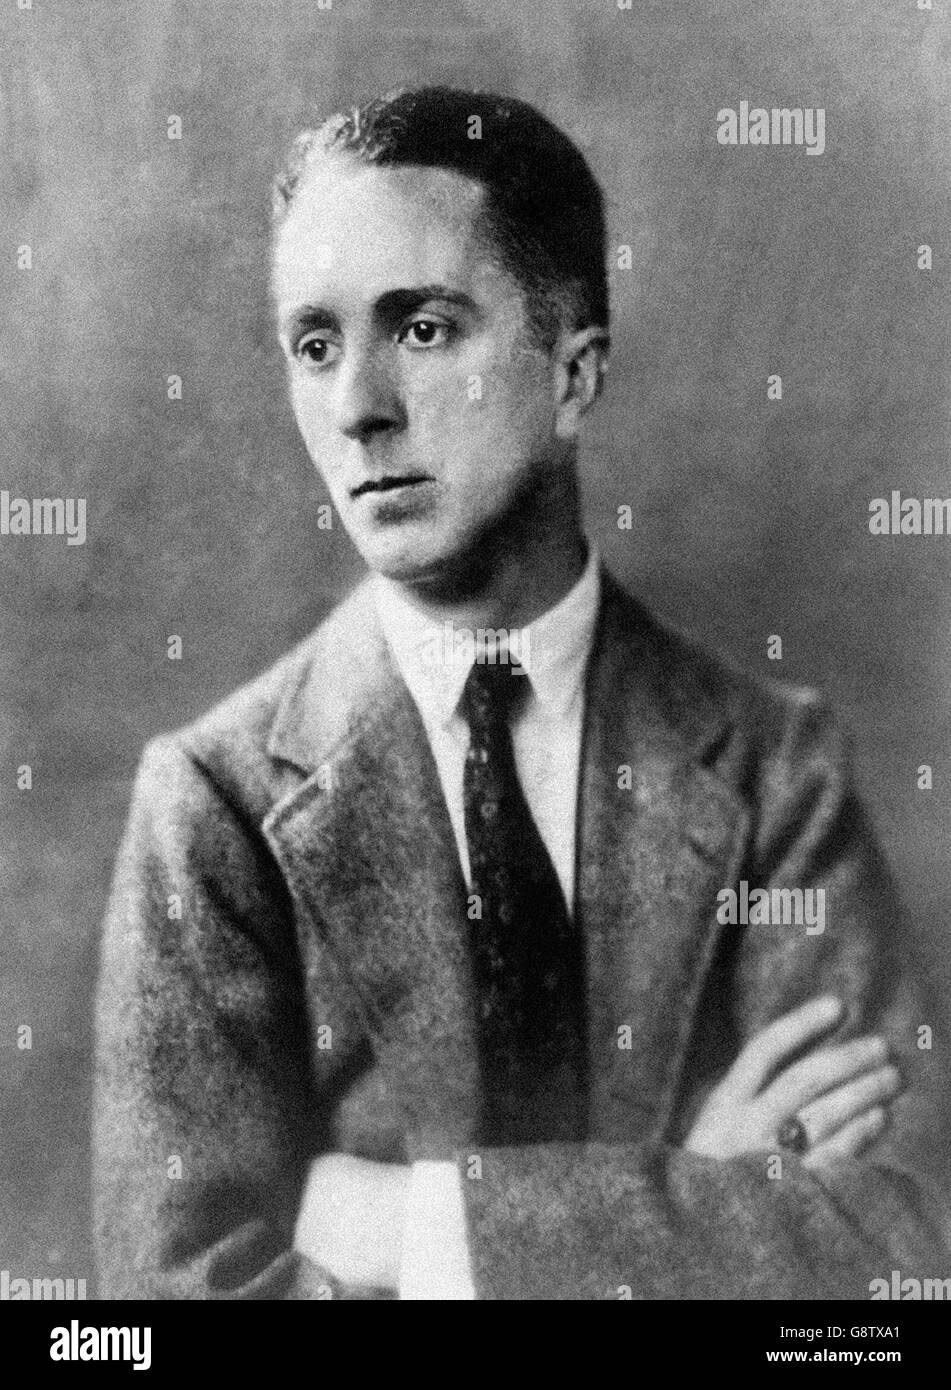 Norman Rockwell (1894-1978). Portrait of  the American author, painter and illustrator. Photo by Underwood and Underwood, 1921 Stock Photo